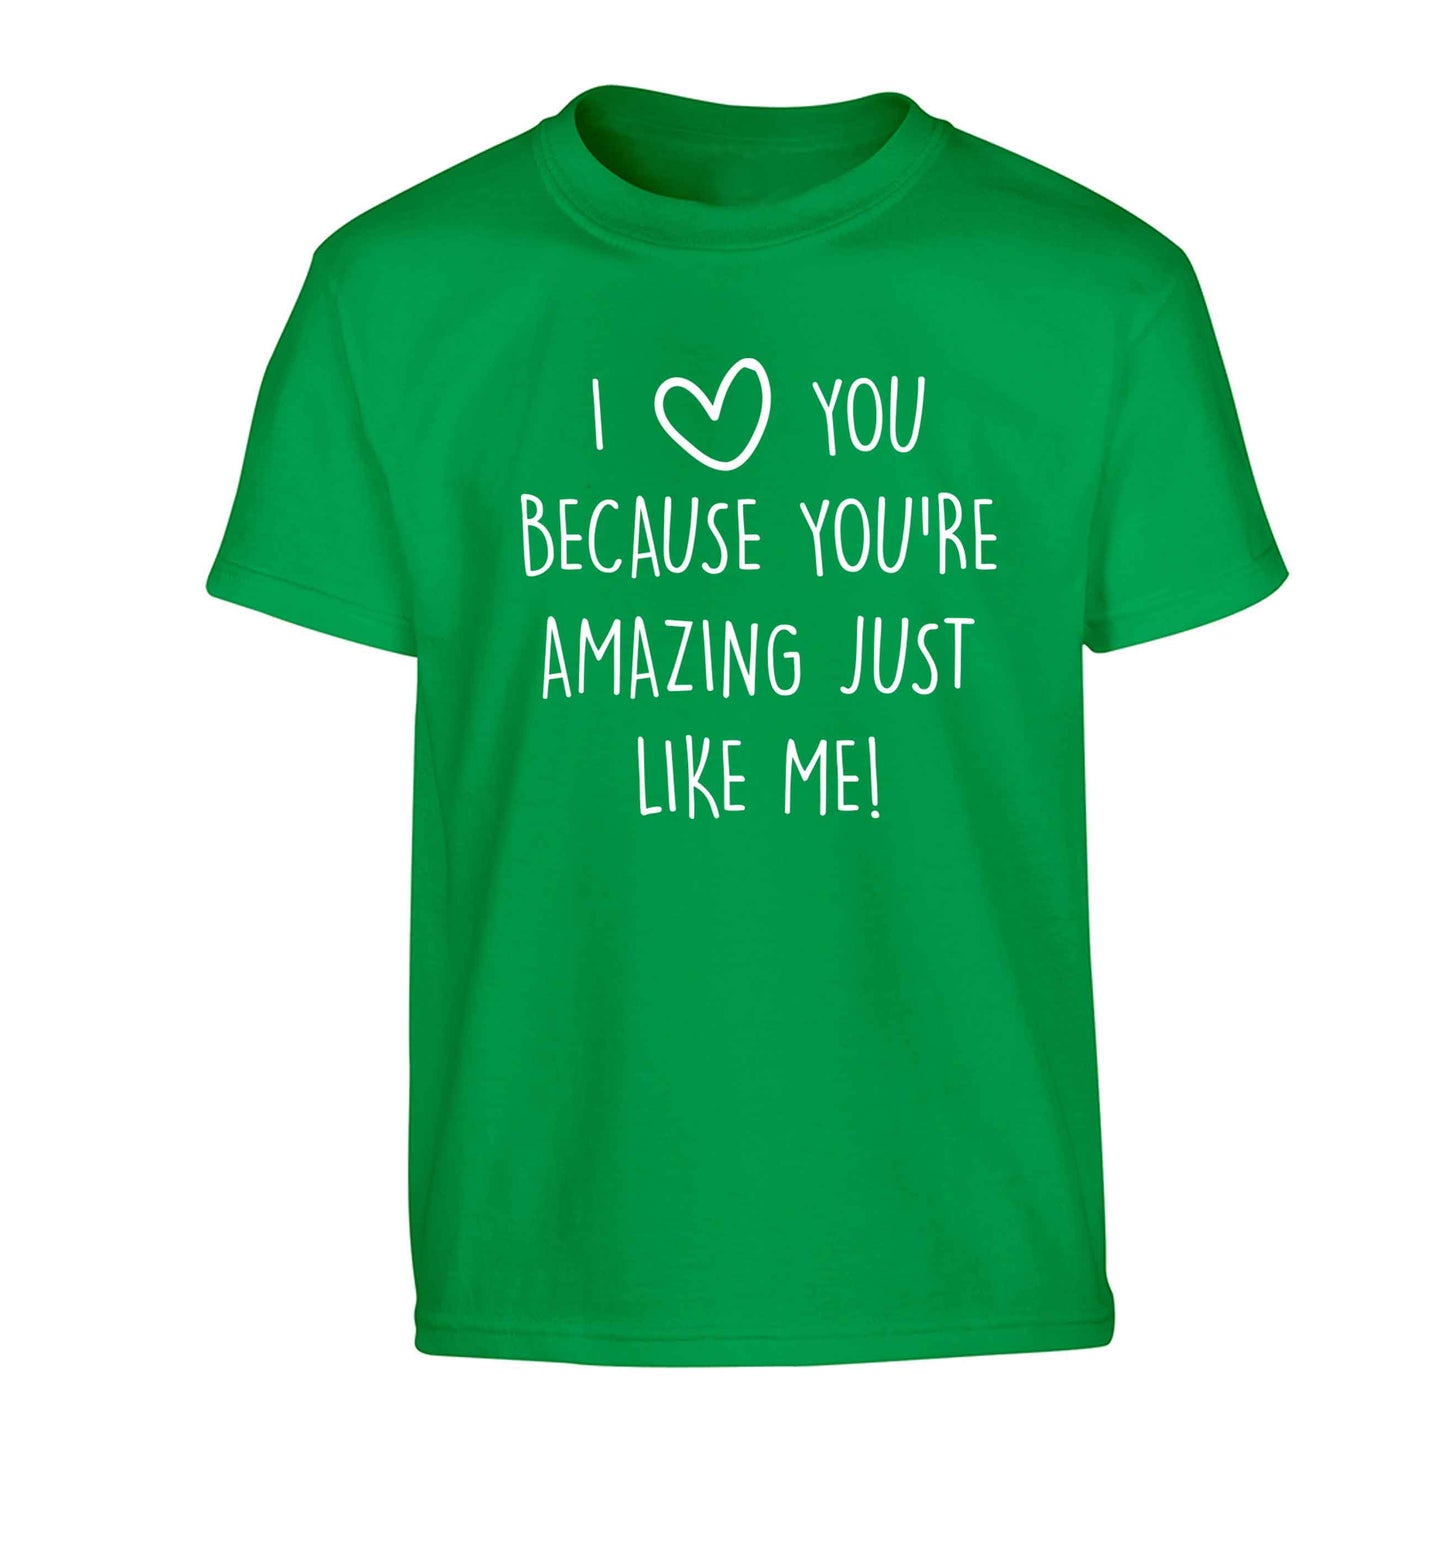 I love you because you're amazing just like me Children's green Tshirt 12-13 Years